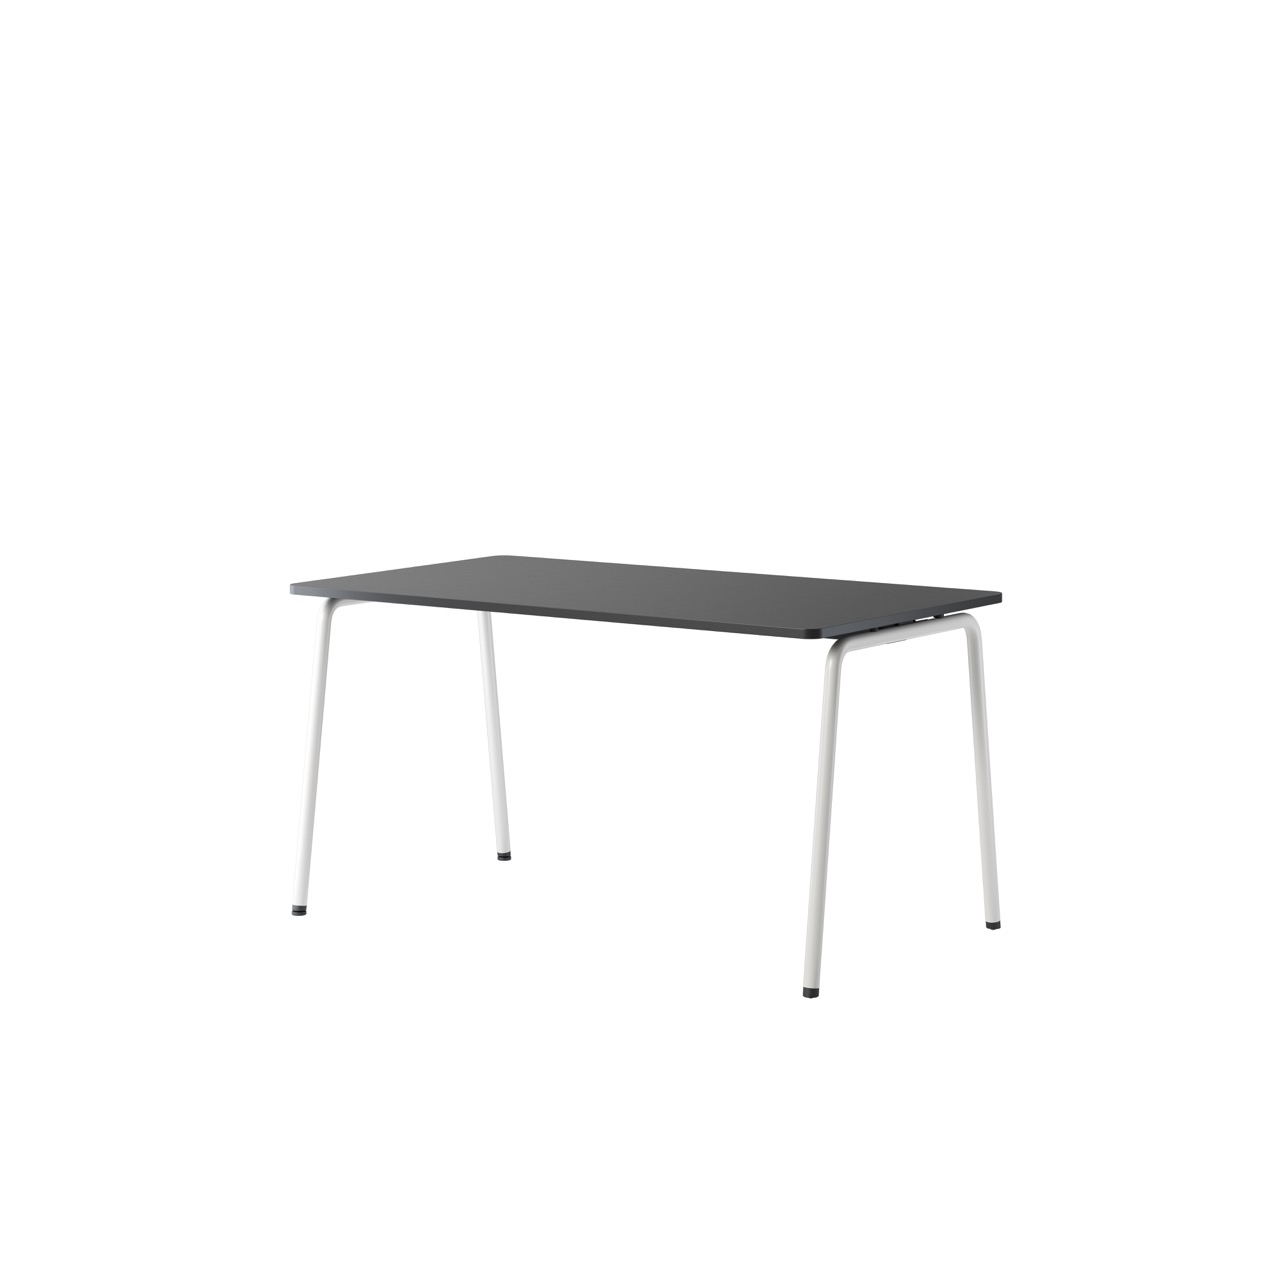 OCEE&FOUR - Tables - FourReal 74 - 140 x 80 - Angled - Packshot Image 15 Large